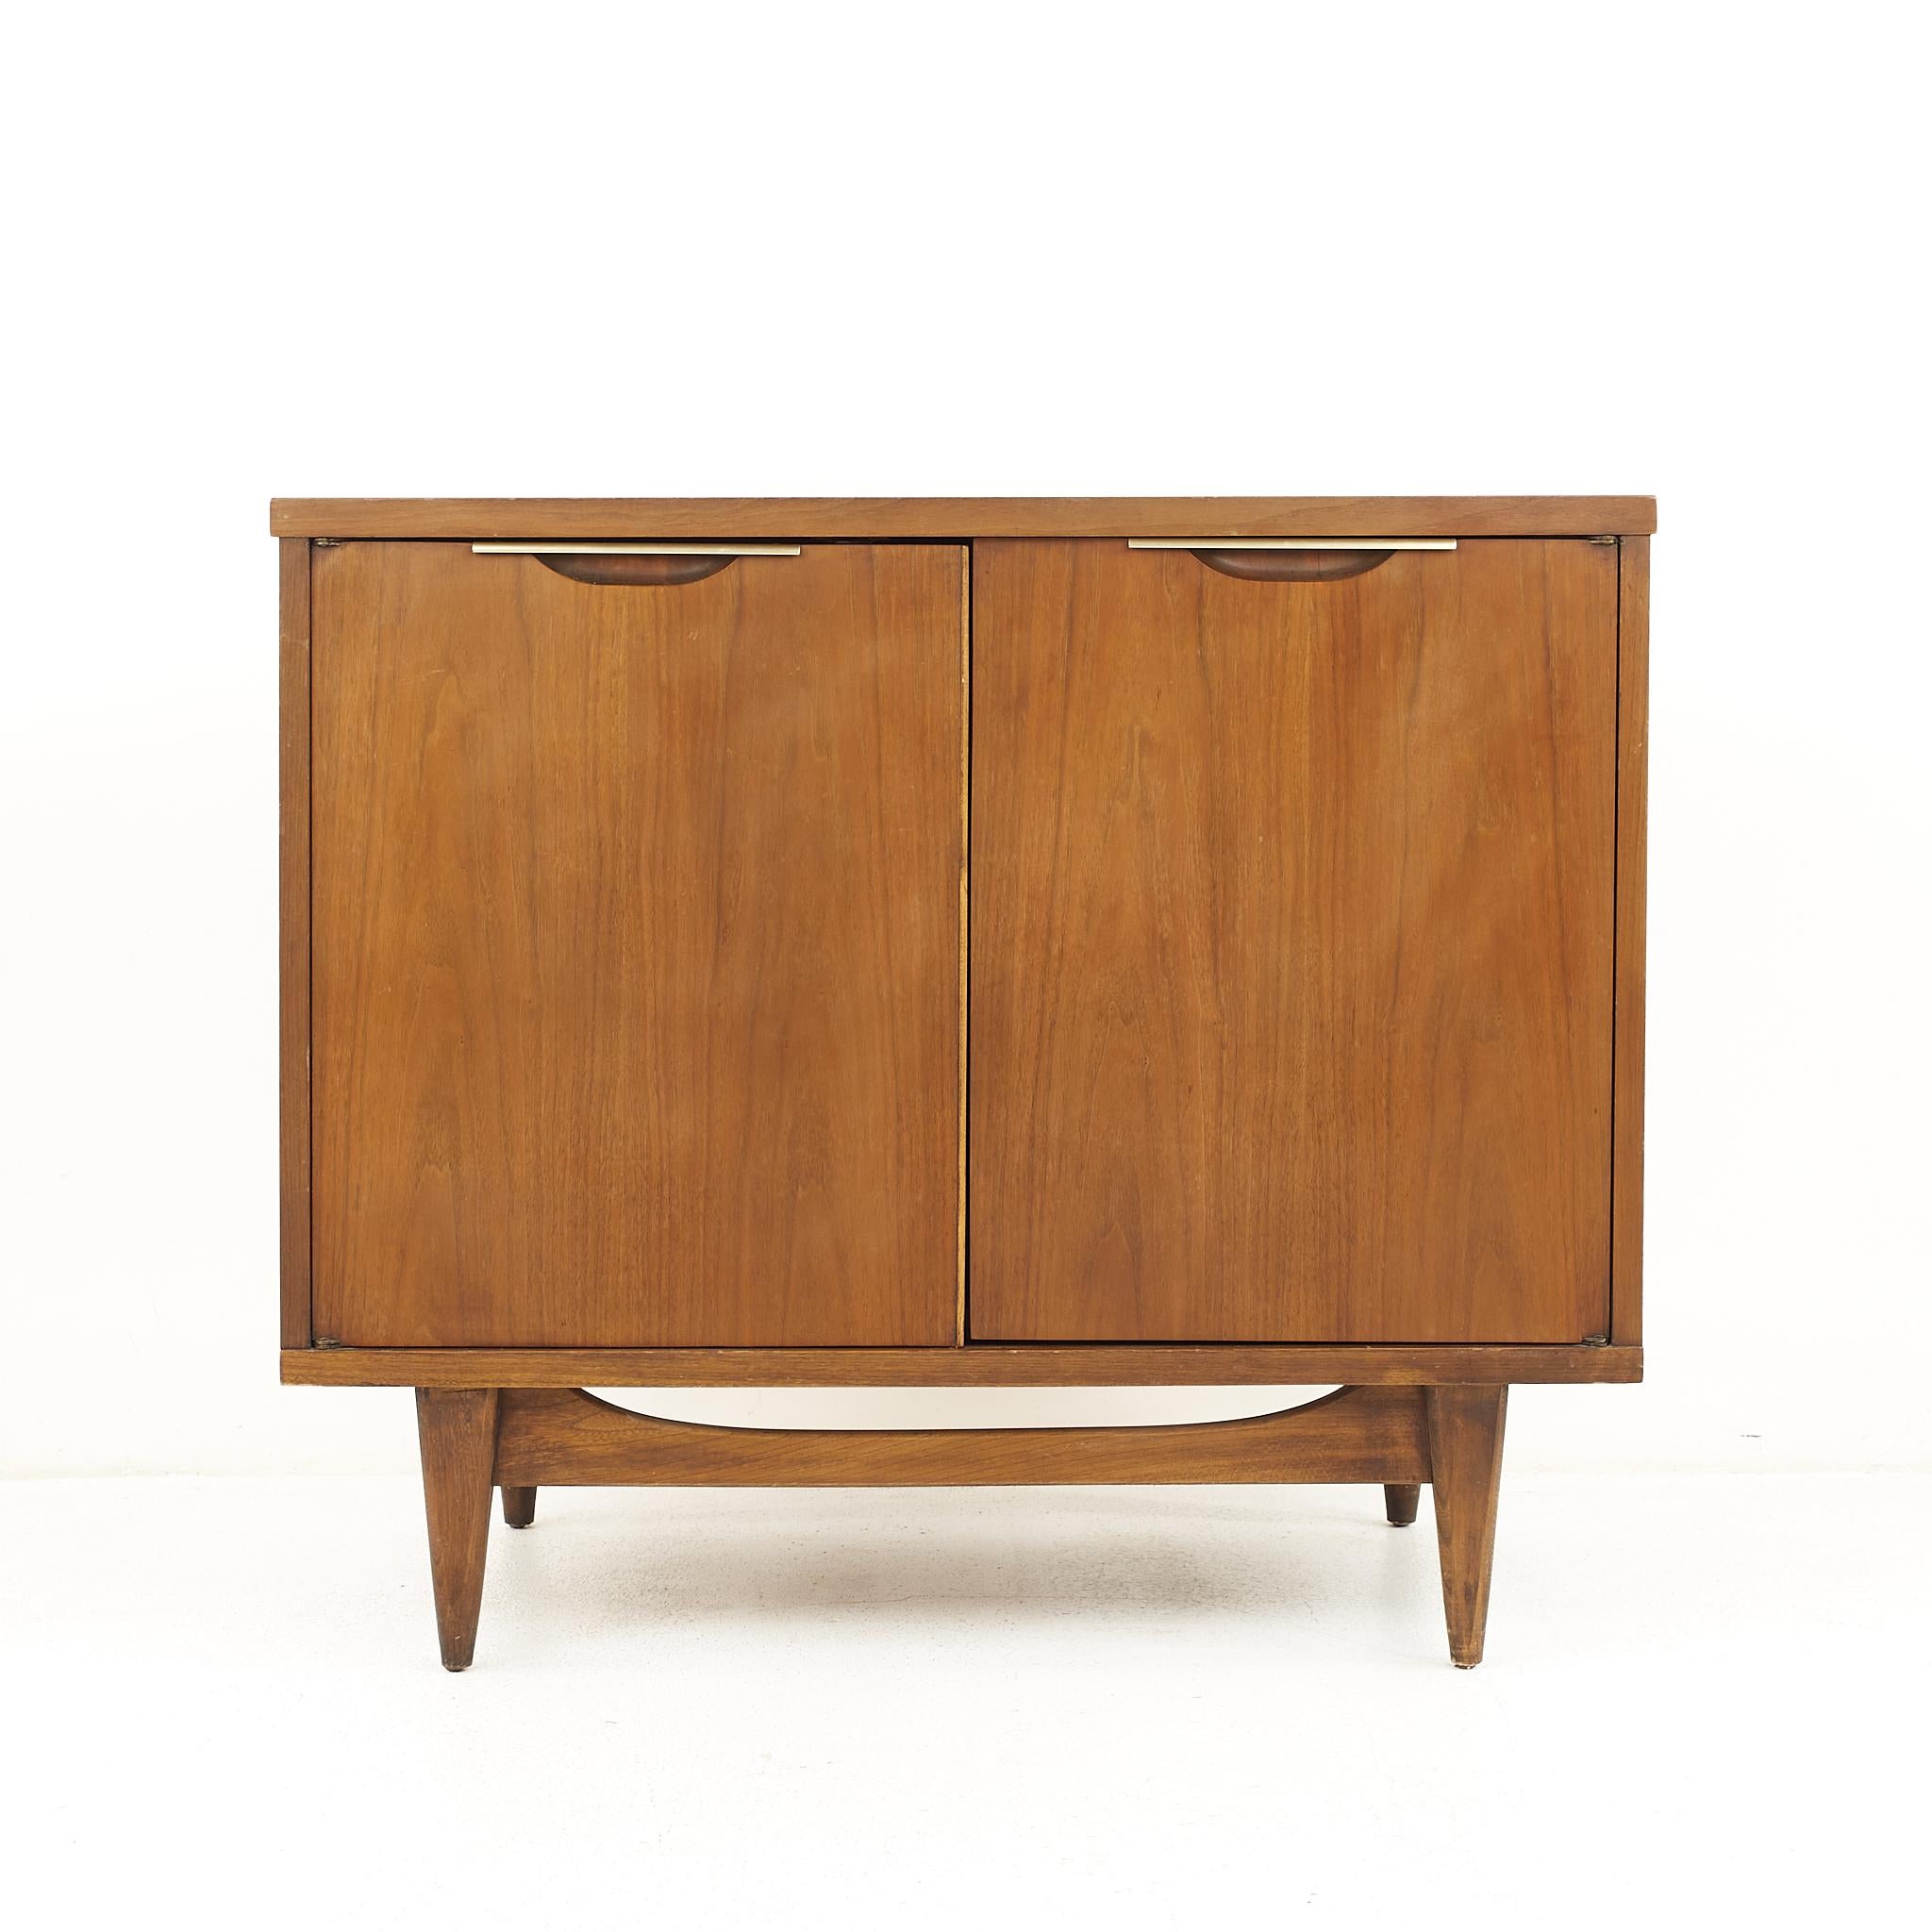 Kent Coffey Tableau Mid Century Walnut 2 Door Cabinet

The cabinet measures: 36 wide x 19 deep x 31.25 inches high

All pieces of furniture can be had in what we call restored vintage condition. That means the piece is restored upon purchase so